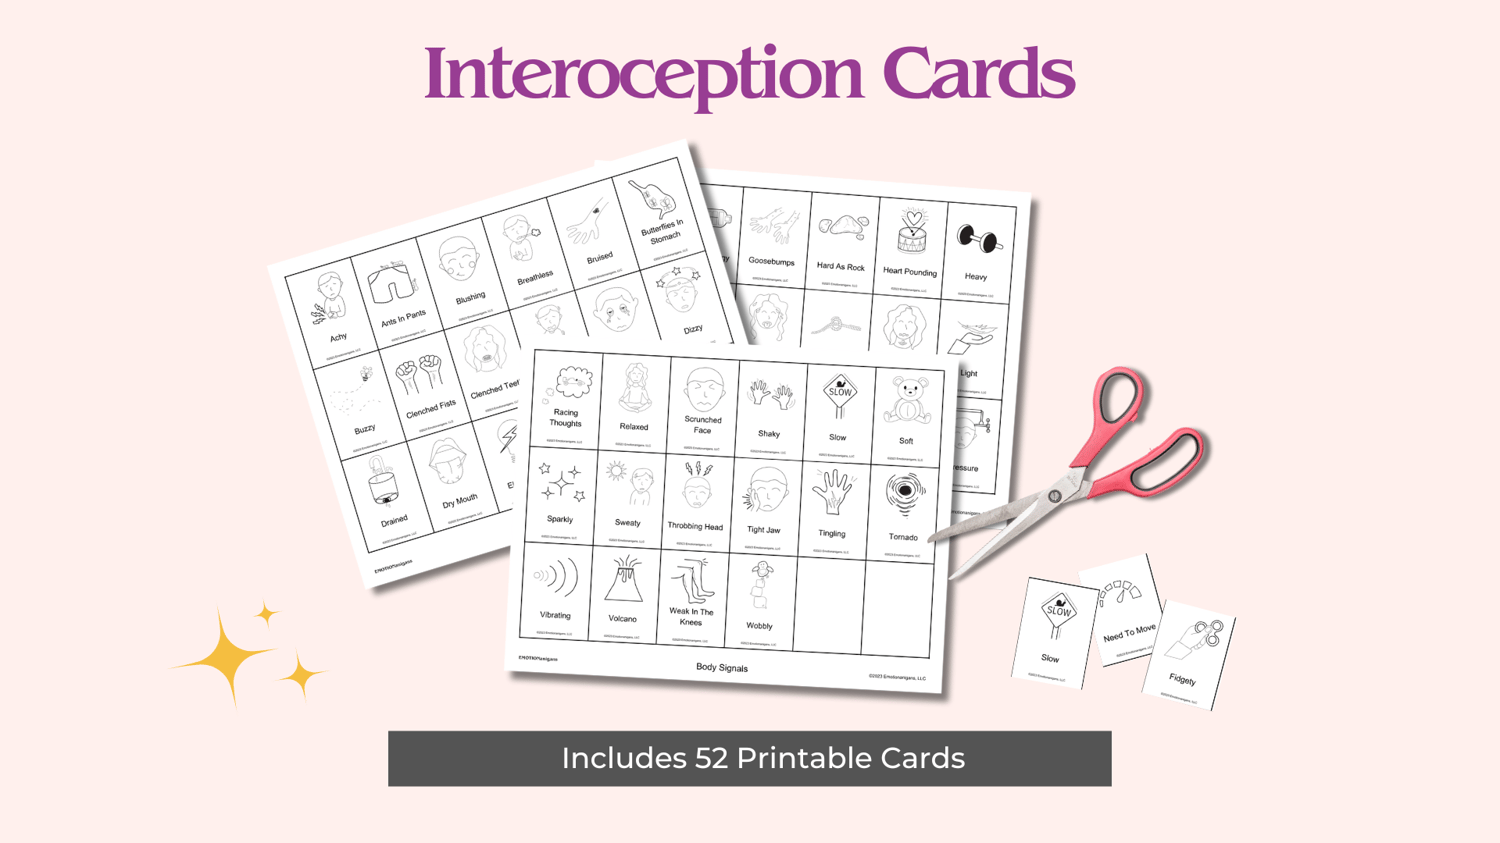 52 Interoception Cards for Body Signals Interoception Counseling Activity